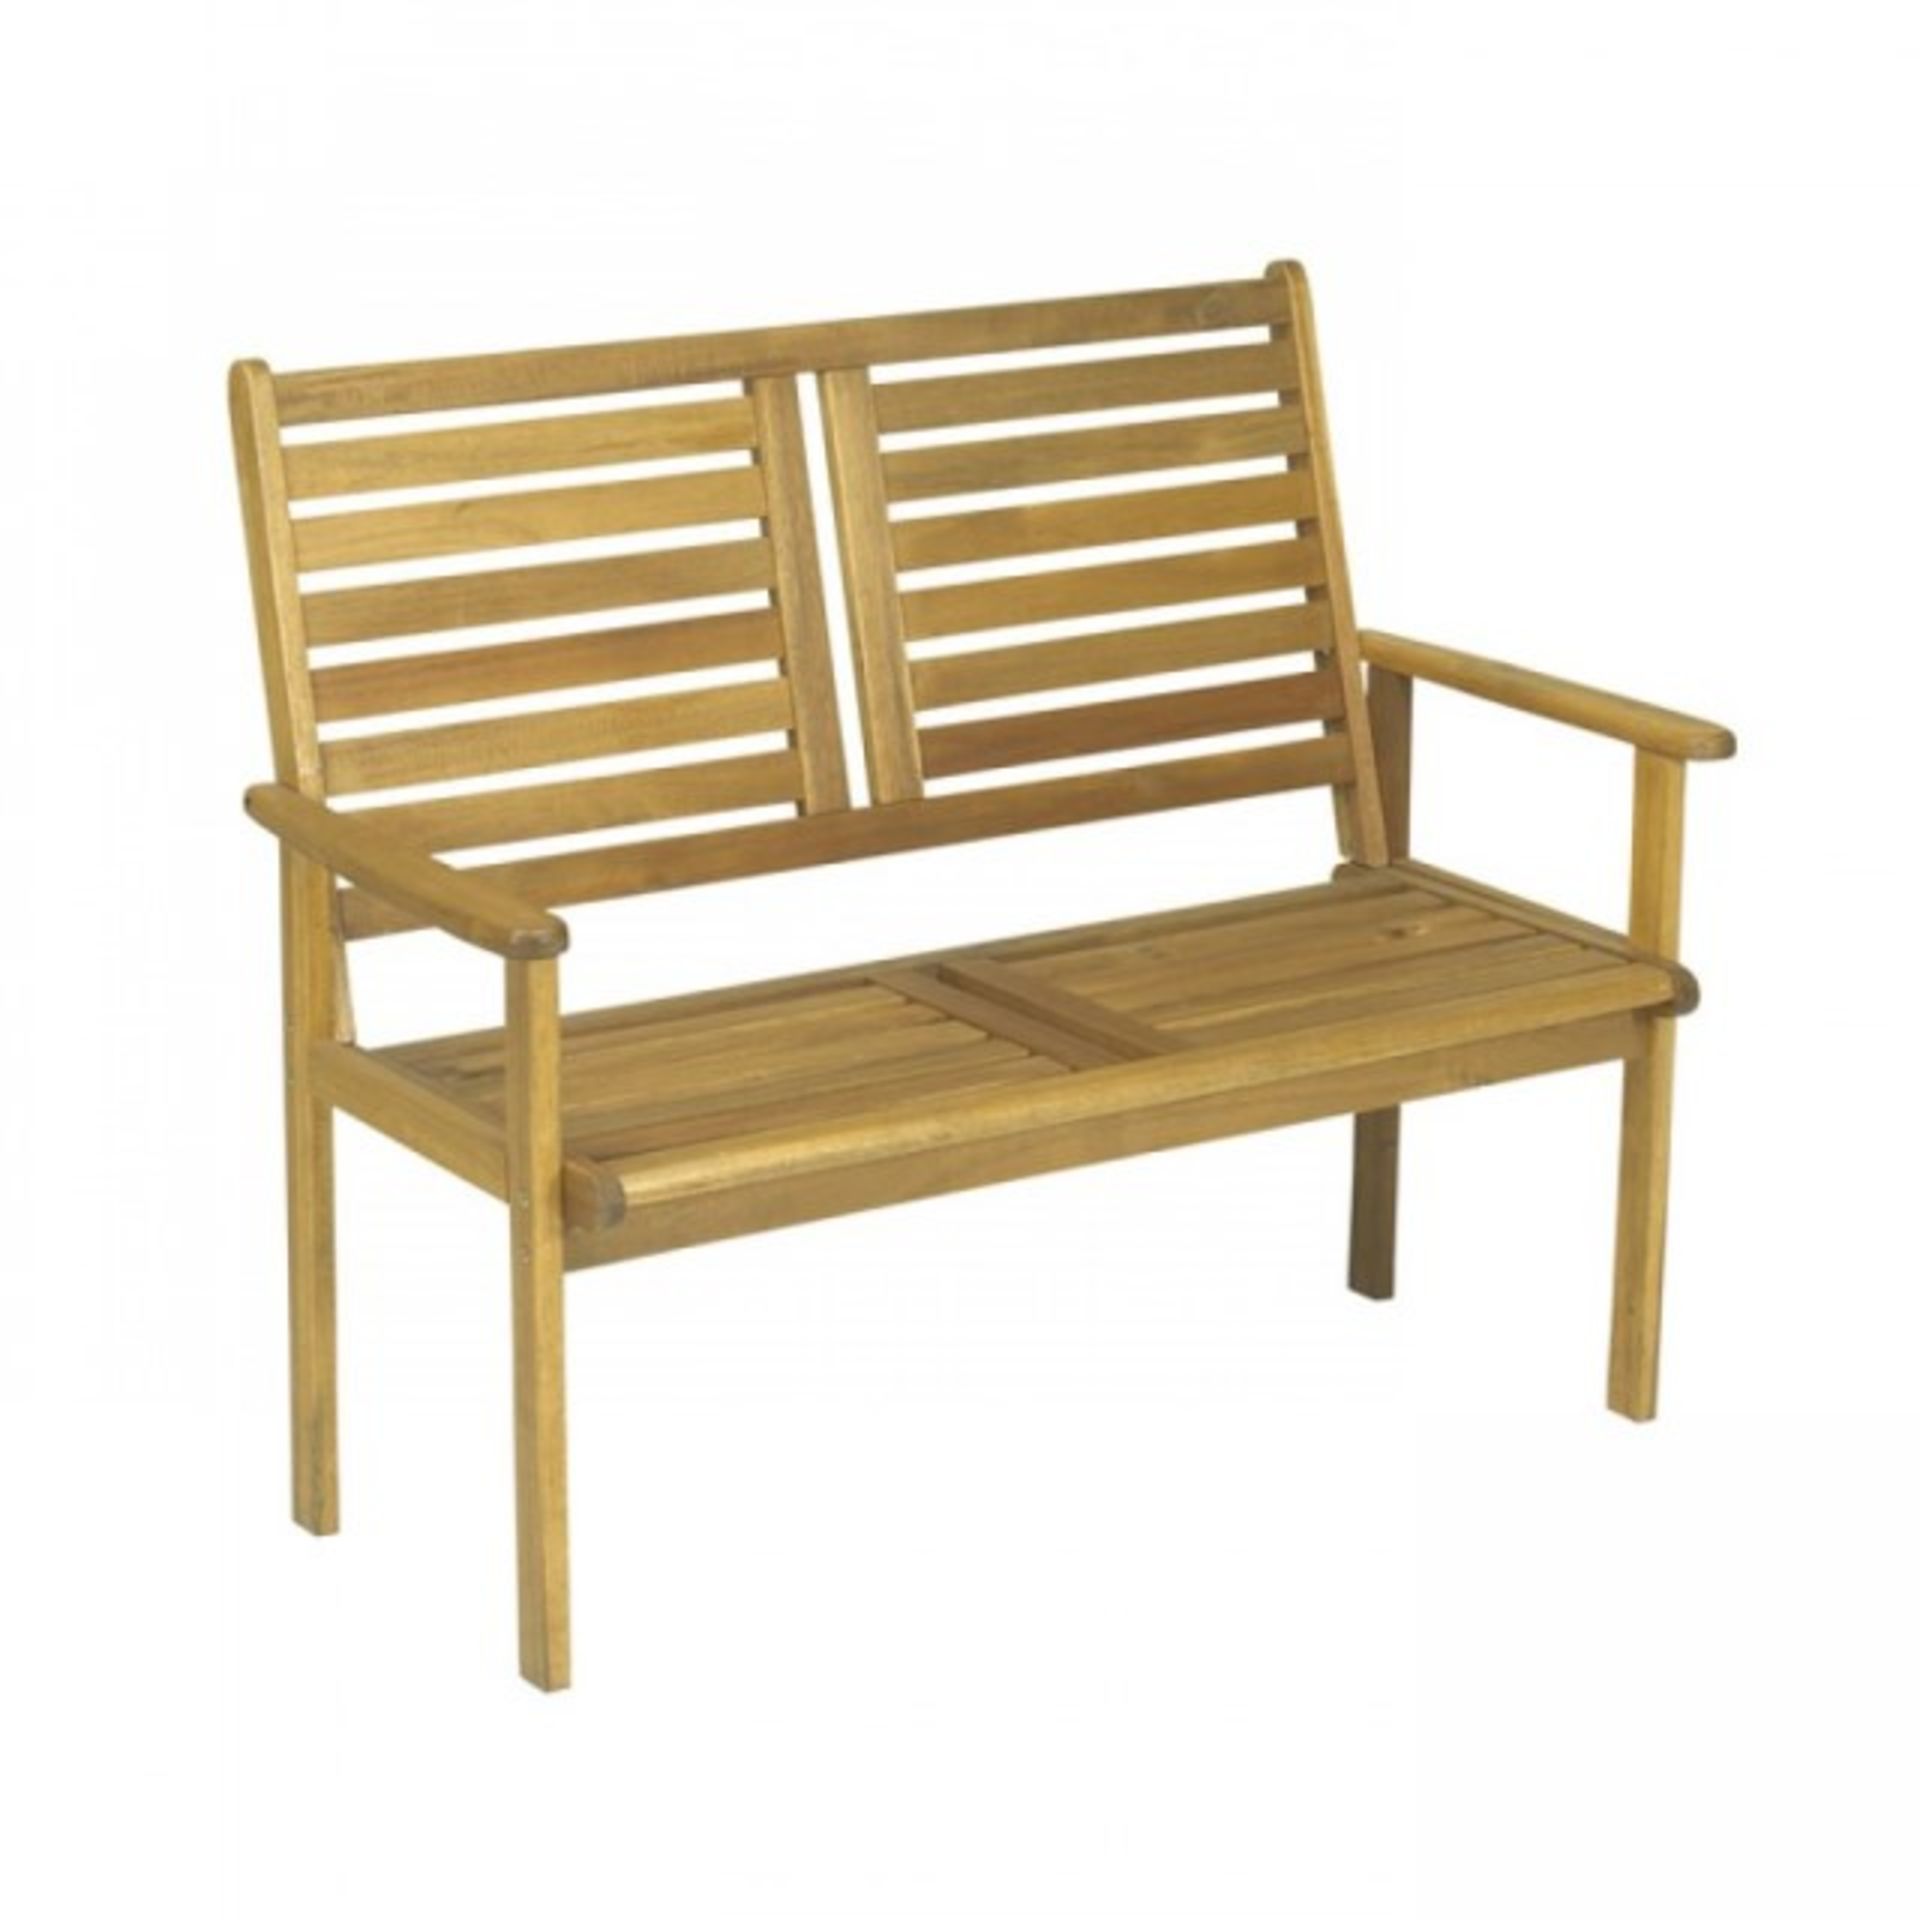 V Brand New Hardwood Two Seater Bench - Image 2 of 2